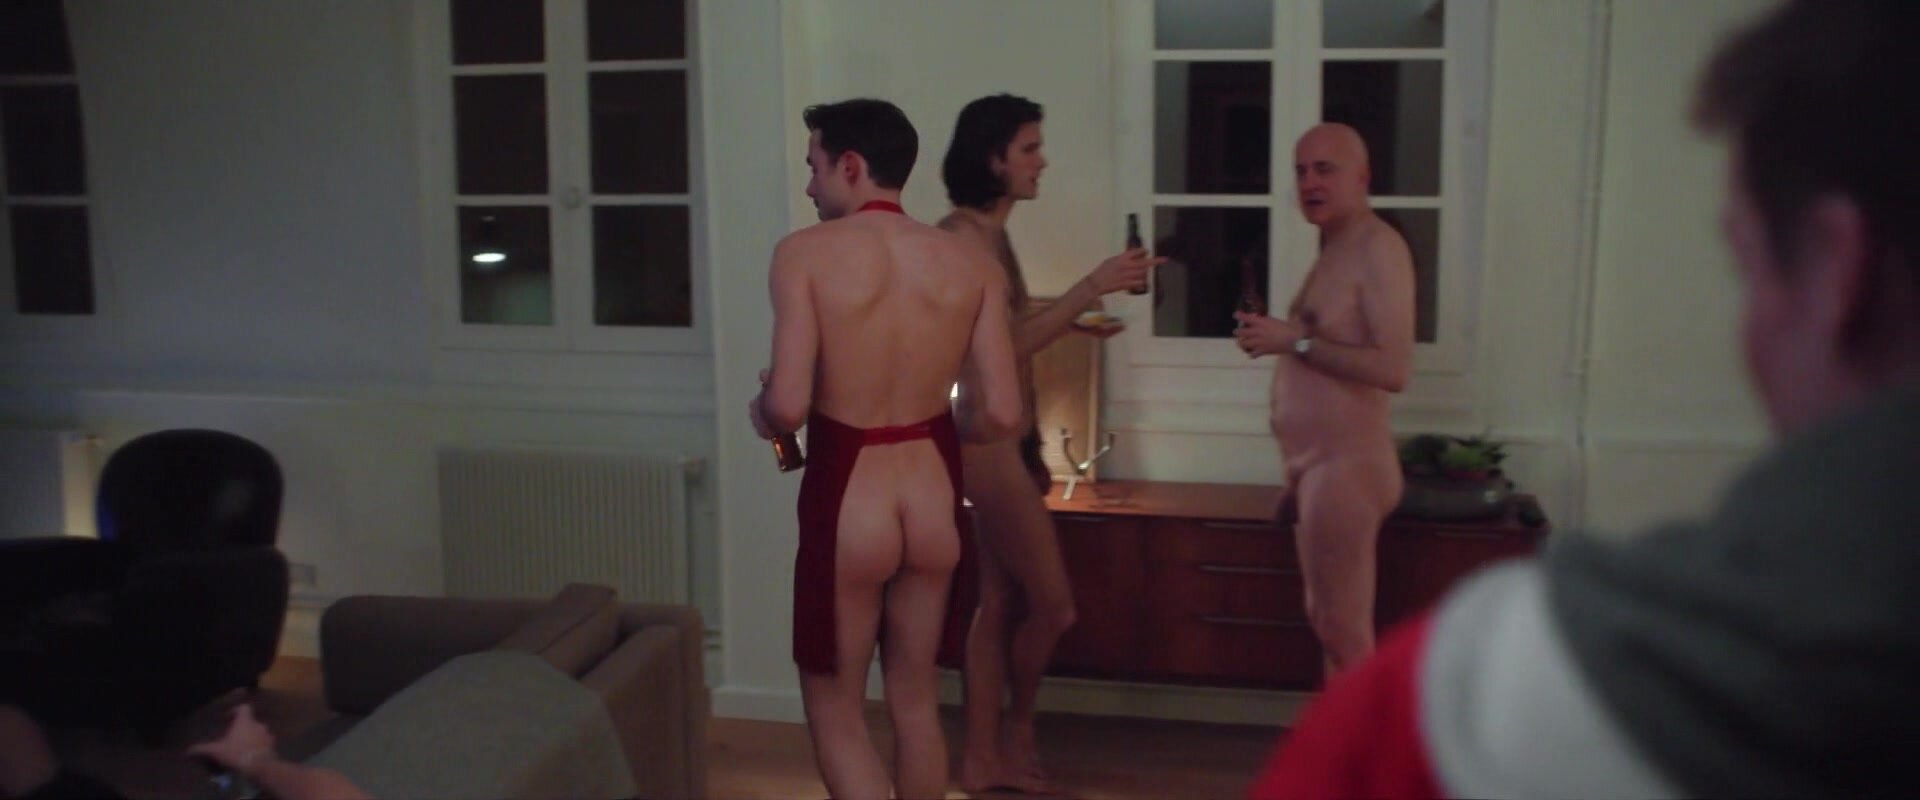 Film scene with nudists at home